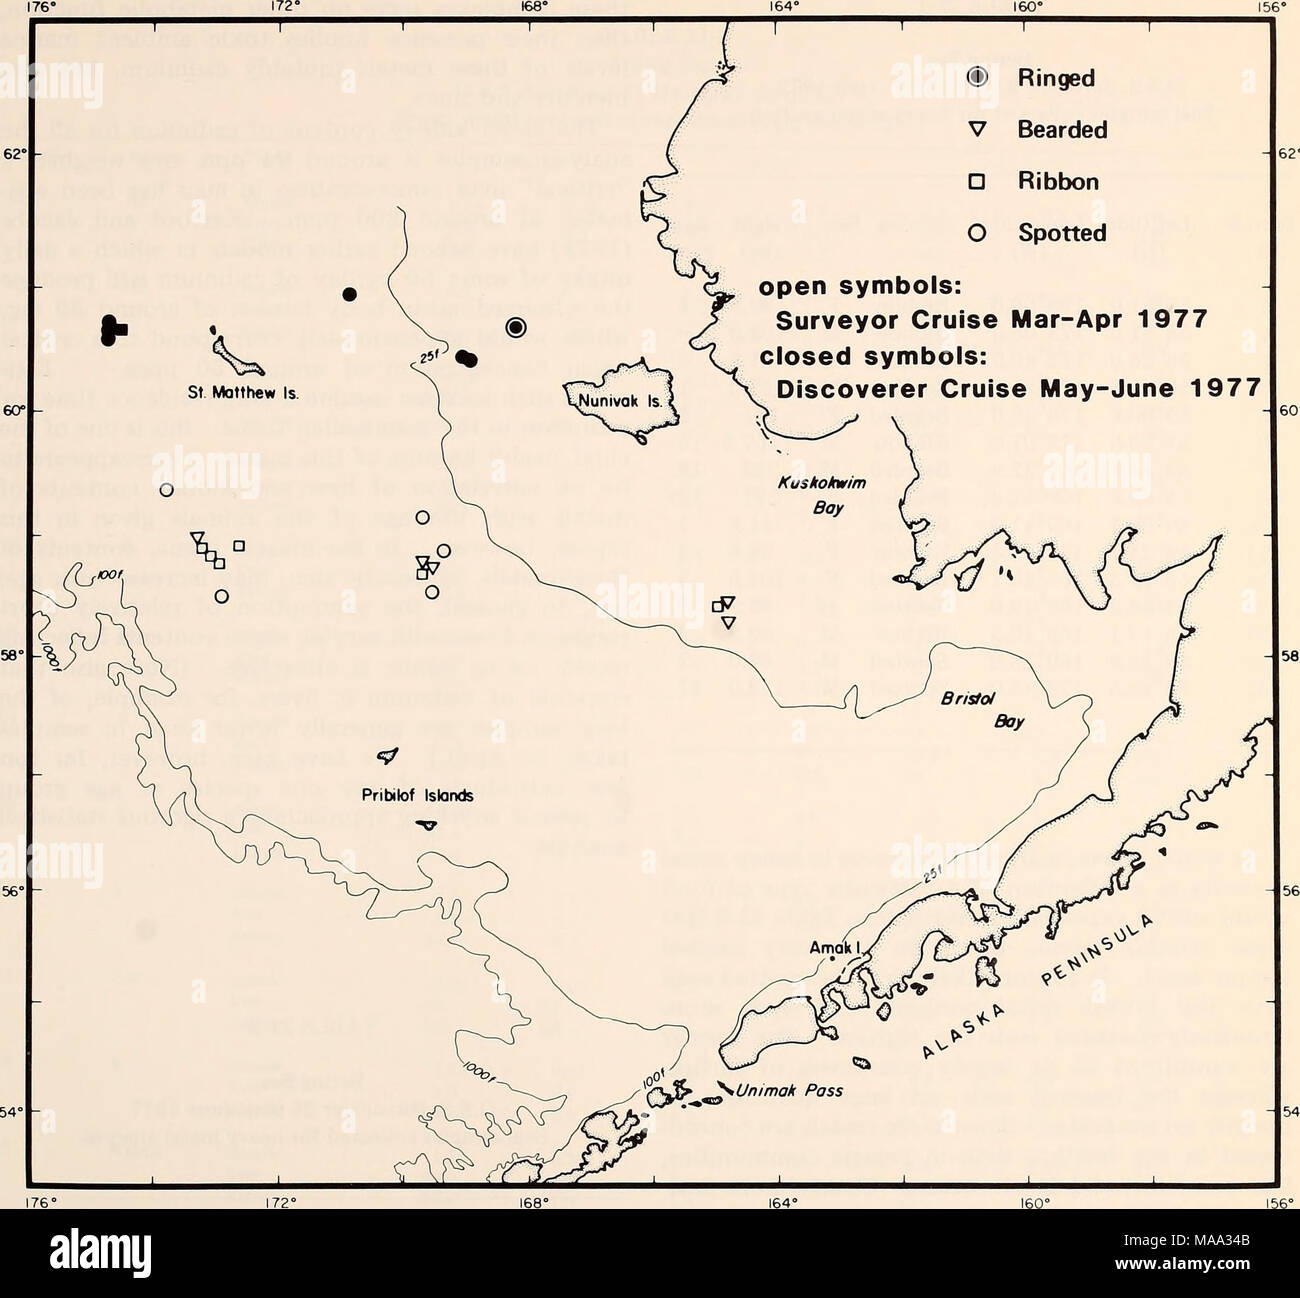 . The Eastern Bering Sea Shelf : oceanography and resources / edited by Donald W. Hood and John A. Calder . Figure 21-3. Localities of seal samples collected on O.S.S. Surveyor cruise March-April 1977 (open symbols) and O.S.S. Discoverer cruise May-June 1977 (closed symbols). largely for ribbon, spotted, and bearded seals (Tables 21-1 and 21-2), which were believed to feed pre- dominantly on demersal fish and benthos, pelagic fish, and invertebrate benthos respectively. Un- fortunately it was not found feasible to obtain representative food species when the mammals were collected. Nor were sto Stock Photo